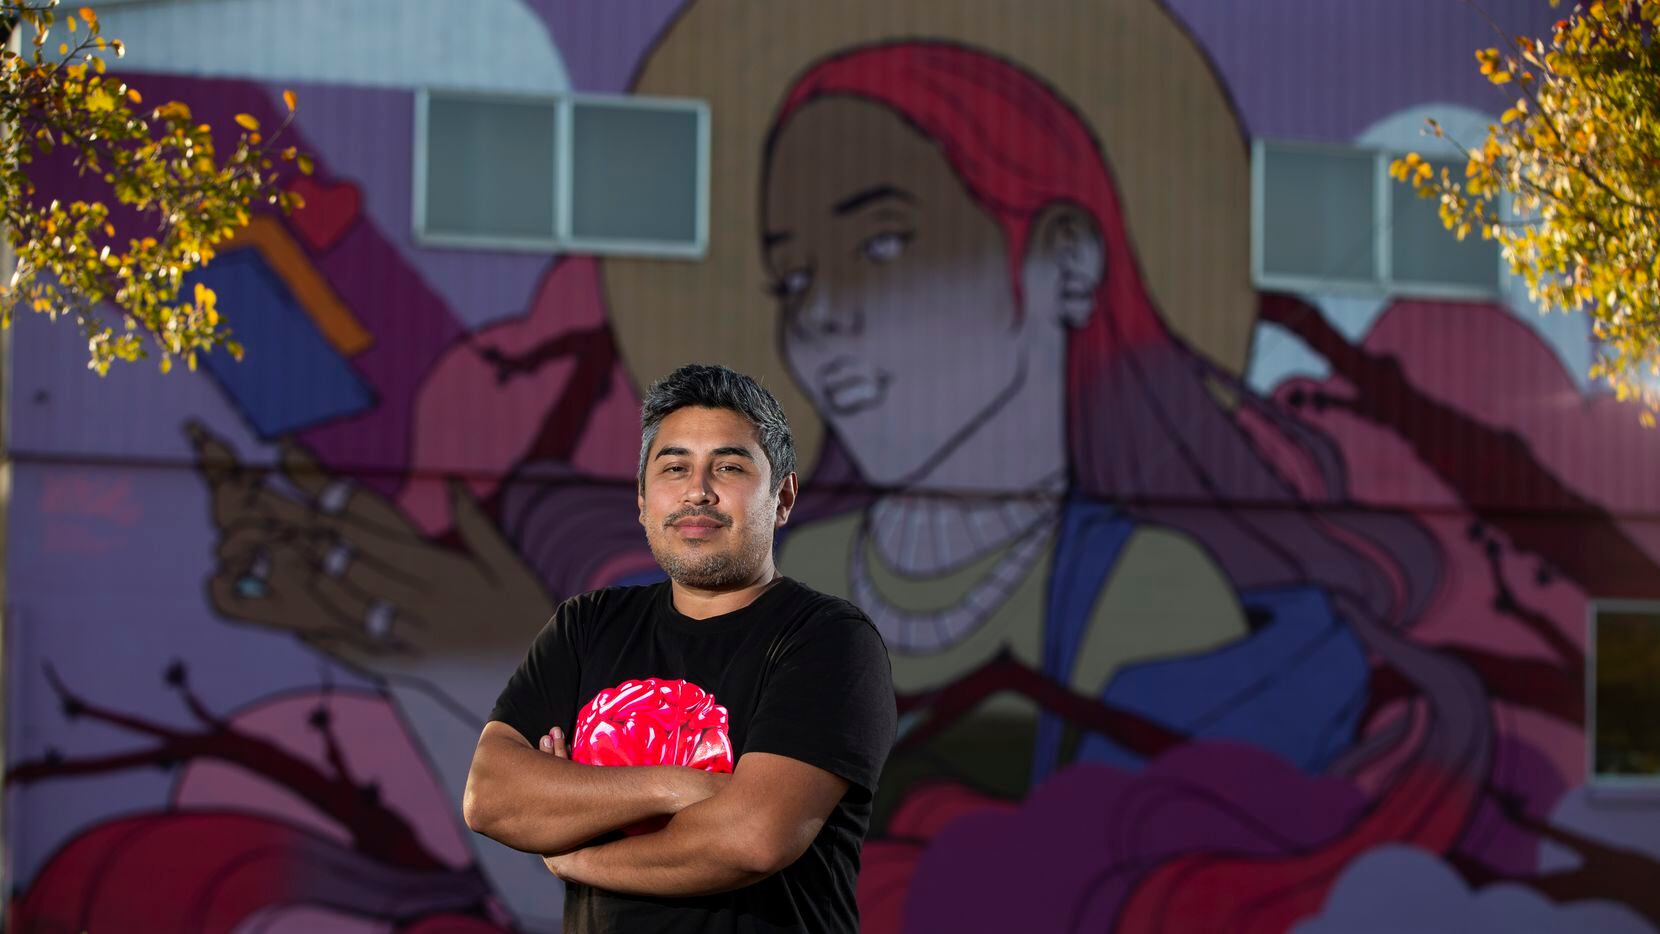 Hatziel Flores posed in front of his mural in West Dallas on Nov. 16, 2021. Street art...